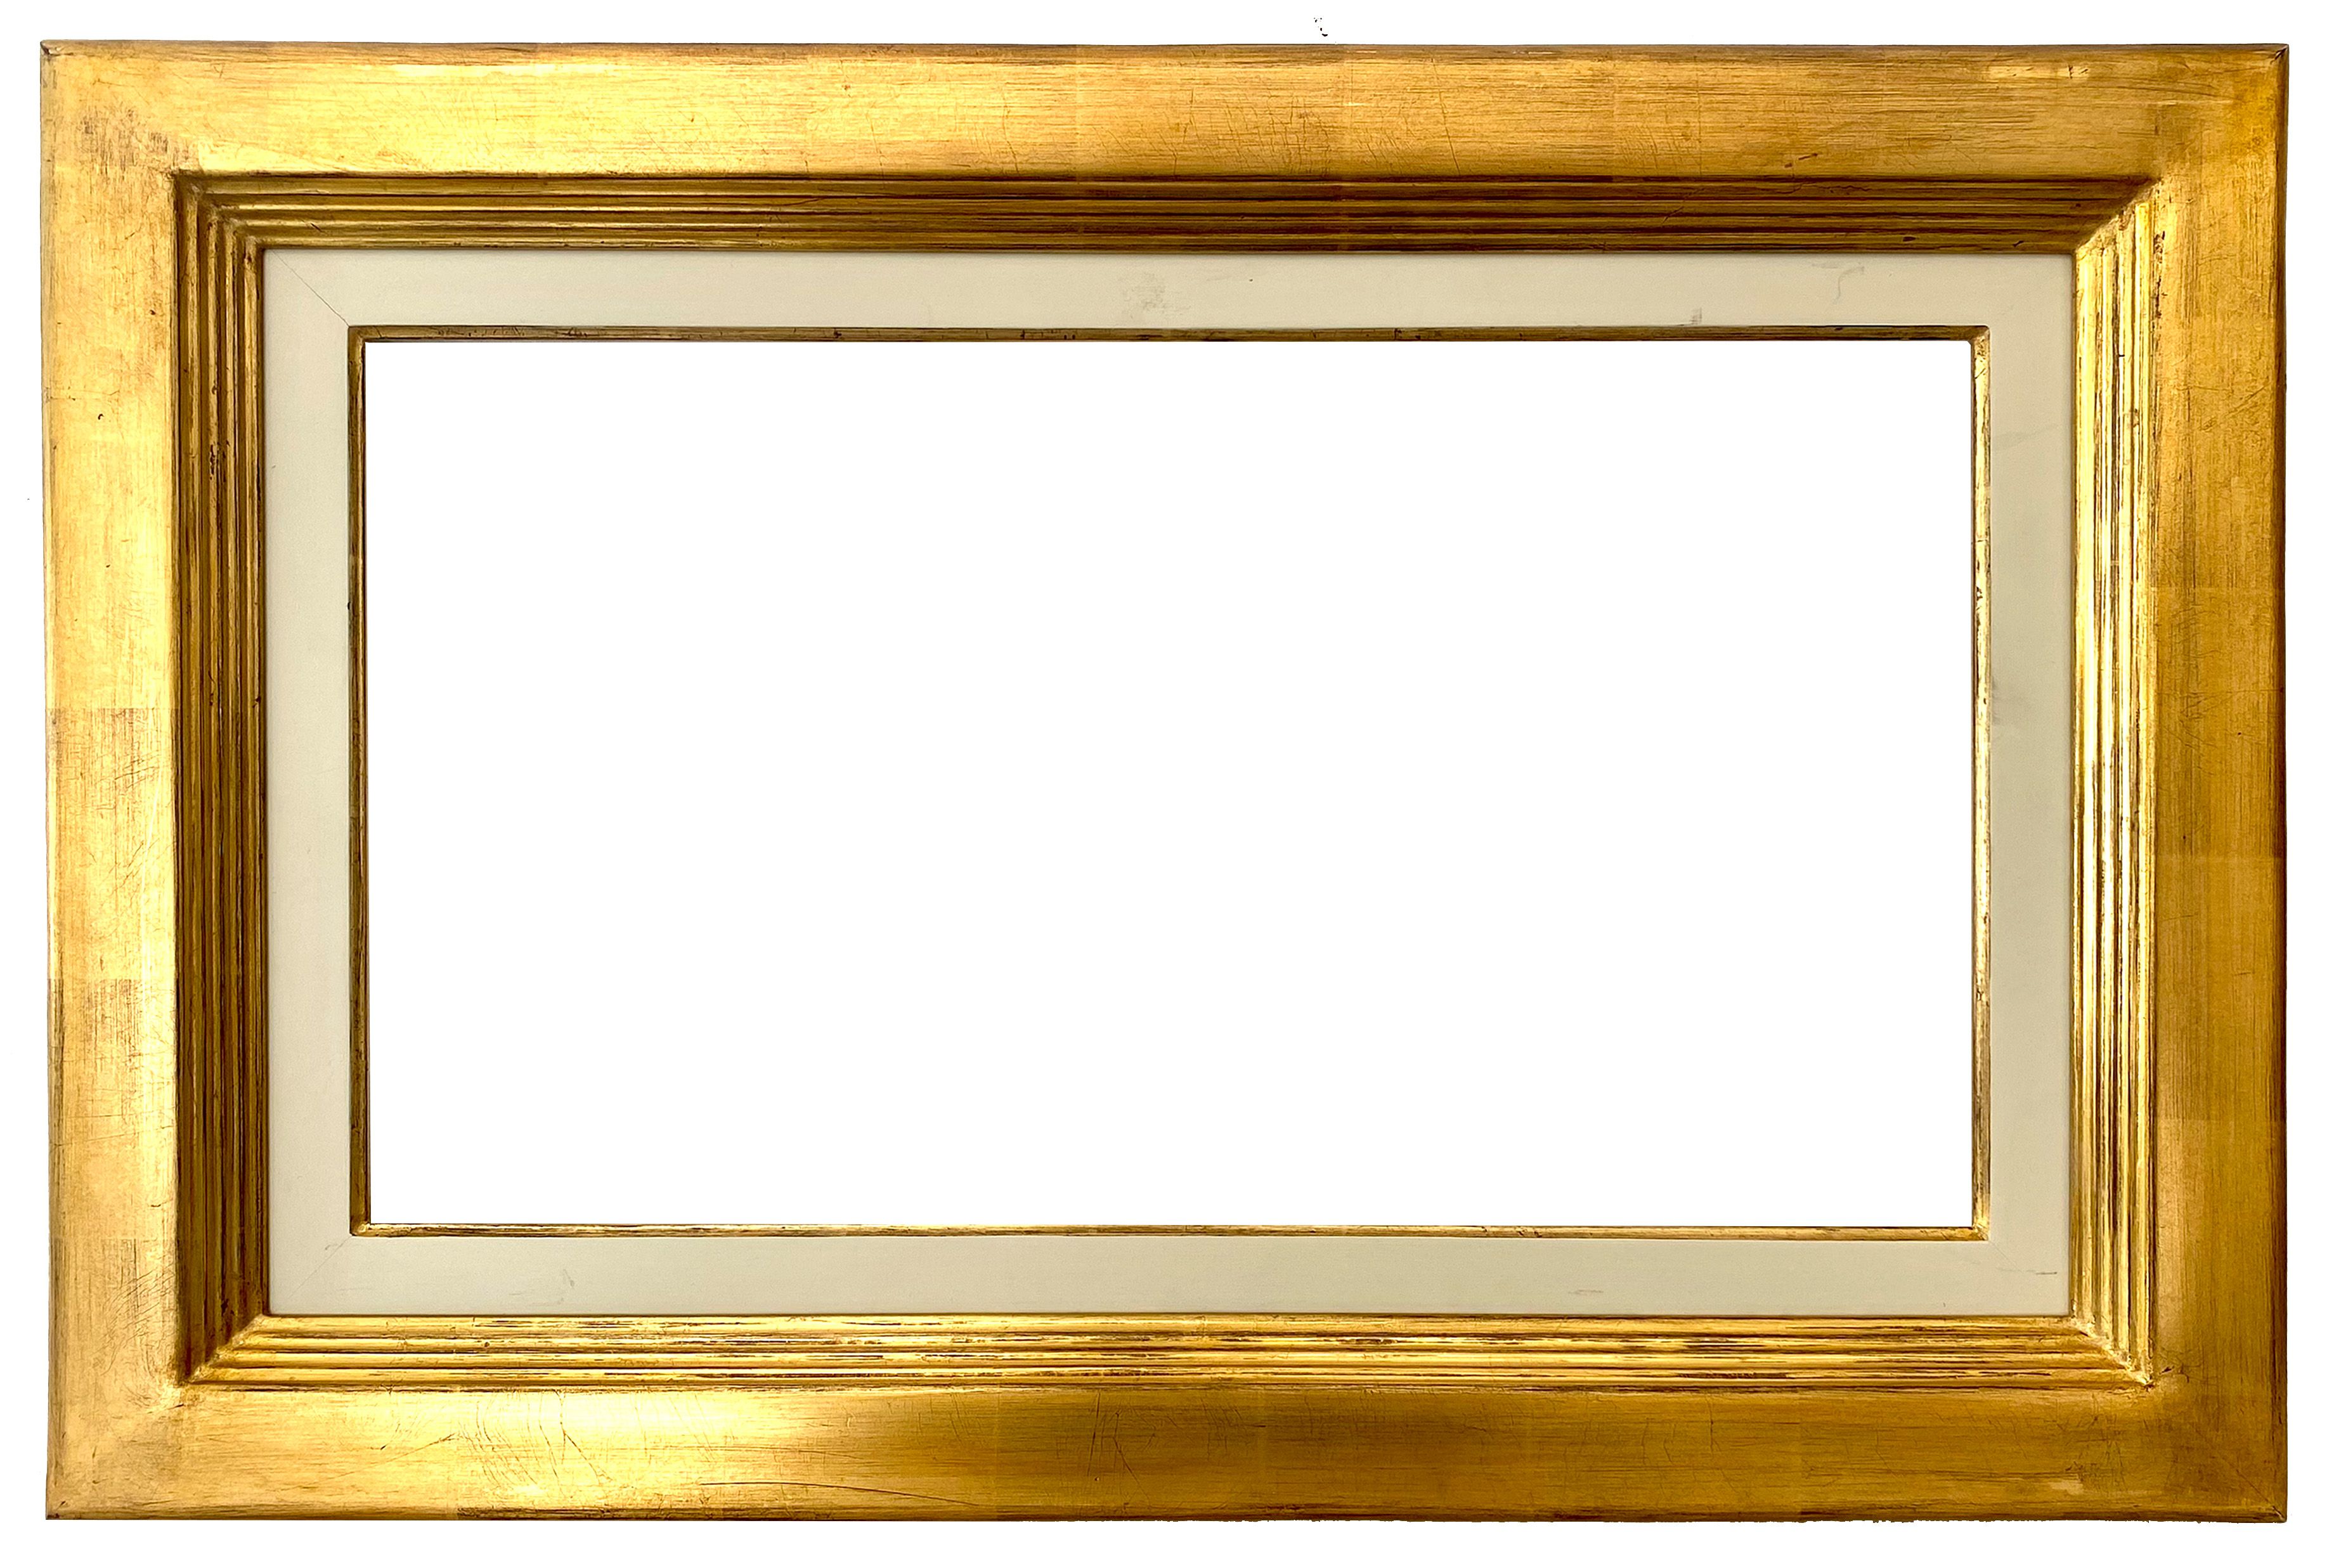 Contemporary style frame - 52.50 x 30.00 - REF - 1684